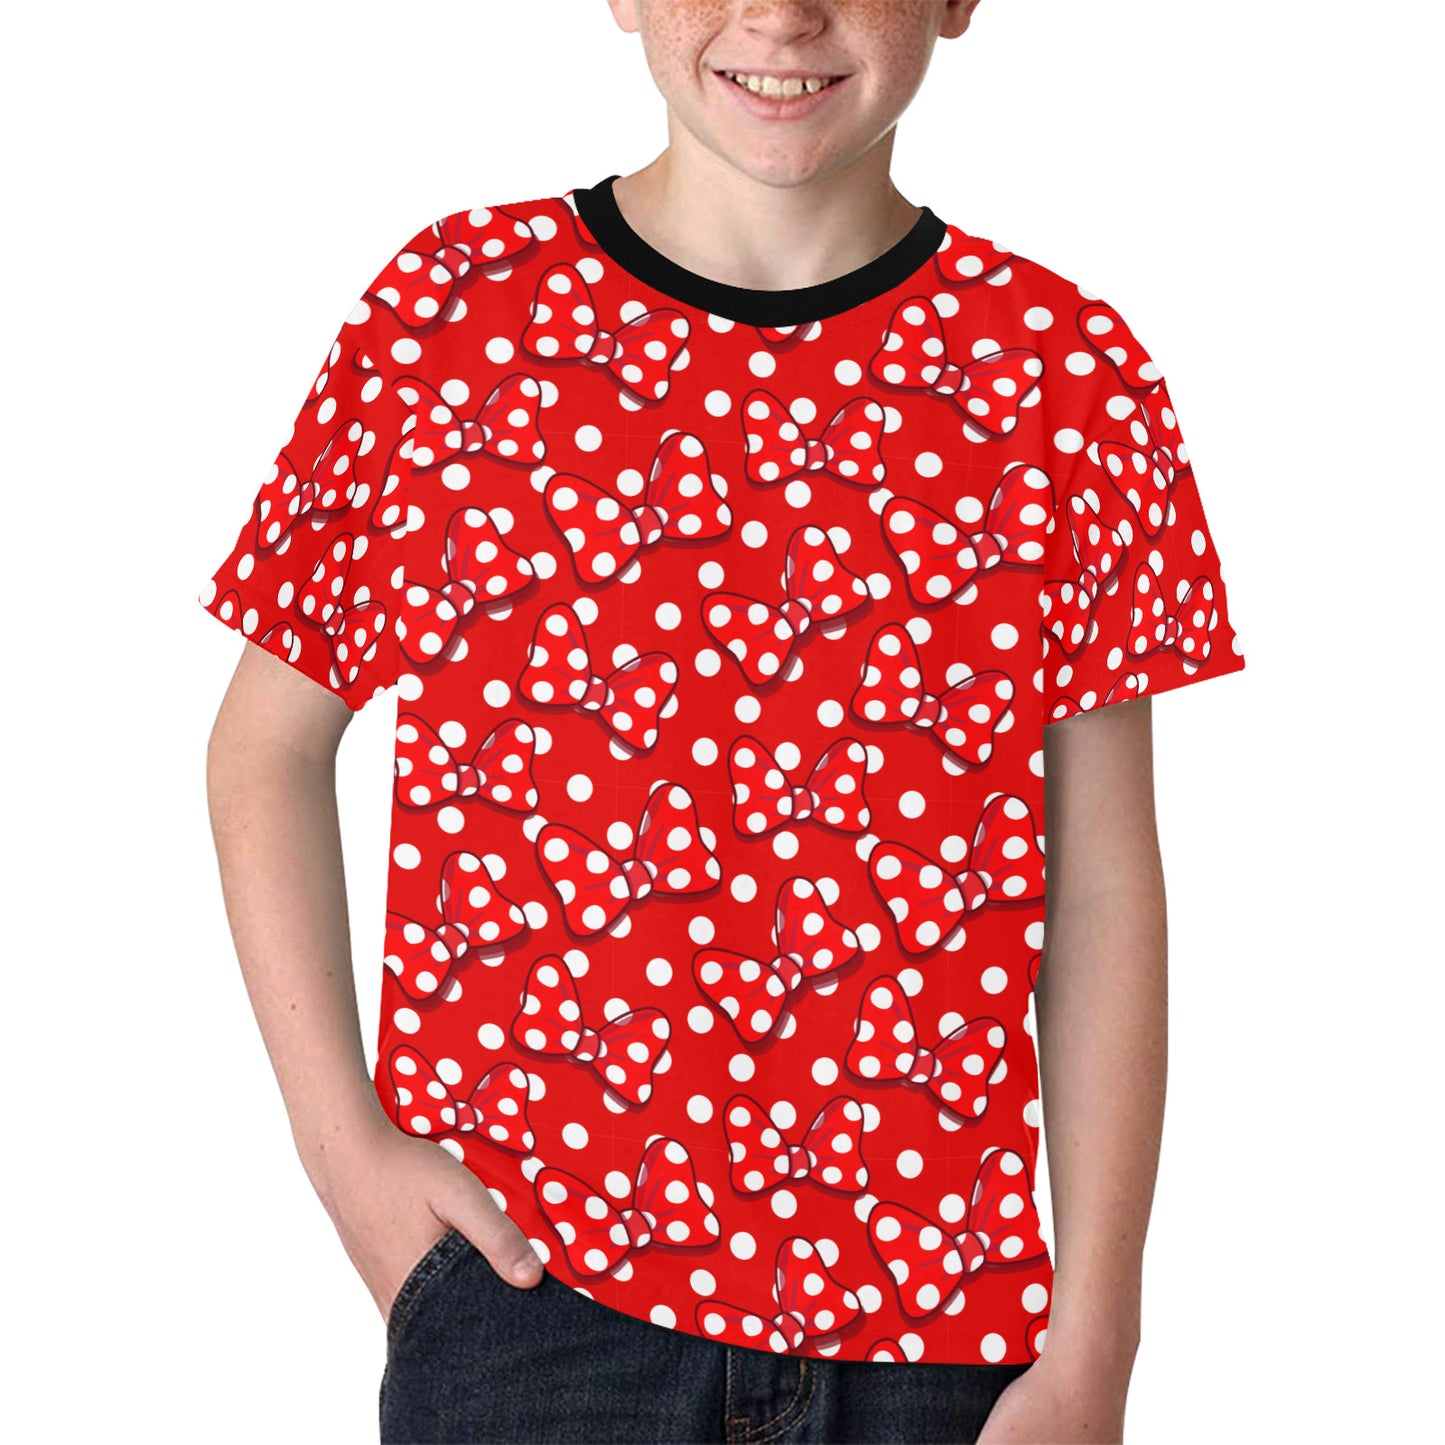 Polka Dot With Red Bows Kids' T-shirt